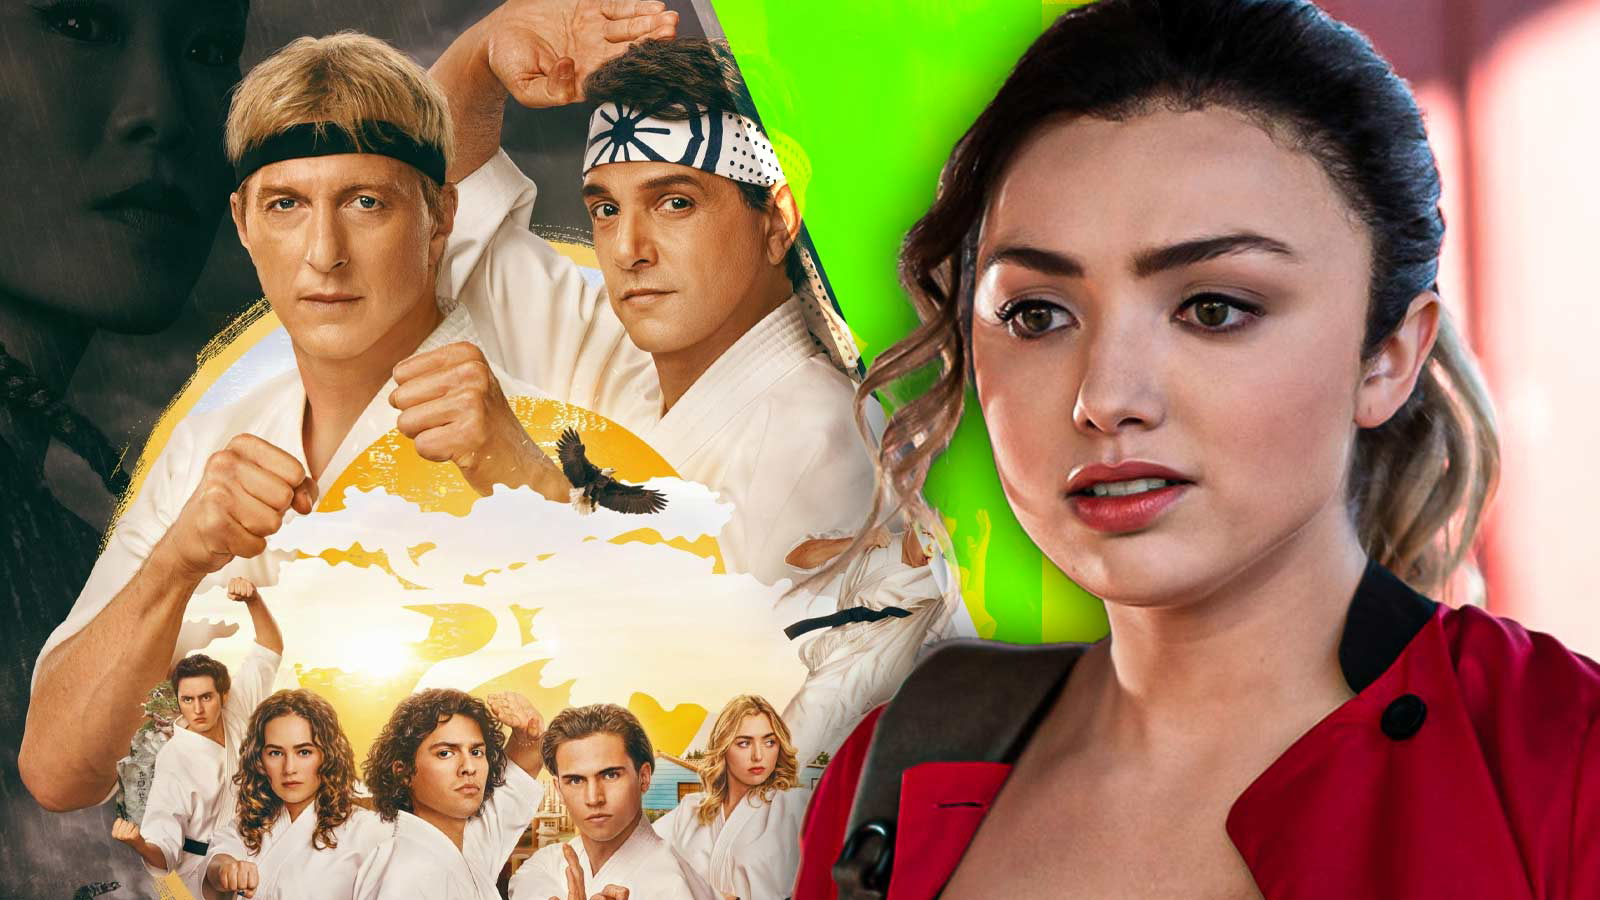 “I was shocked when they loved it”: Peyton List Thanked Her Stars for Landing Cobra Kai After Actress Completely Winged Her Audition After a Sleepless Night